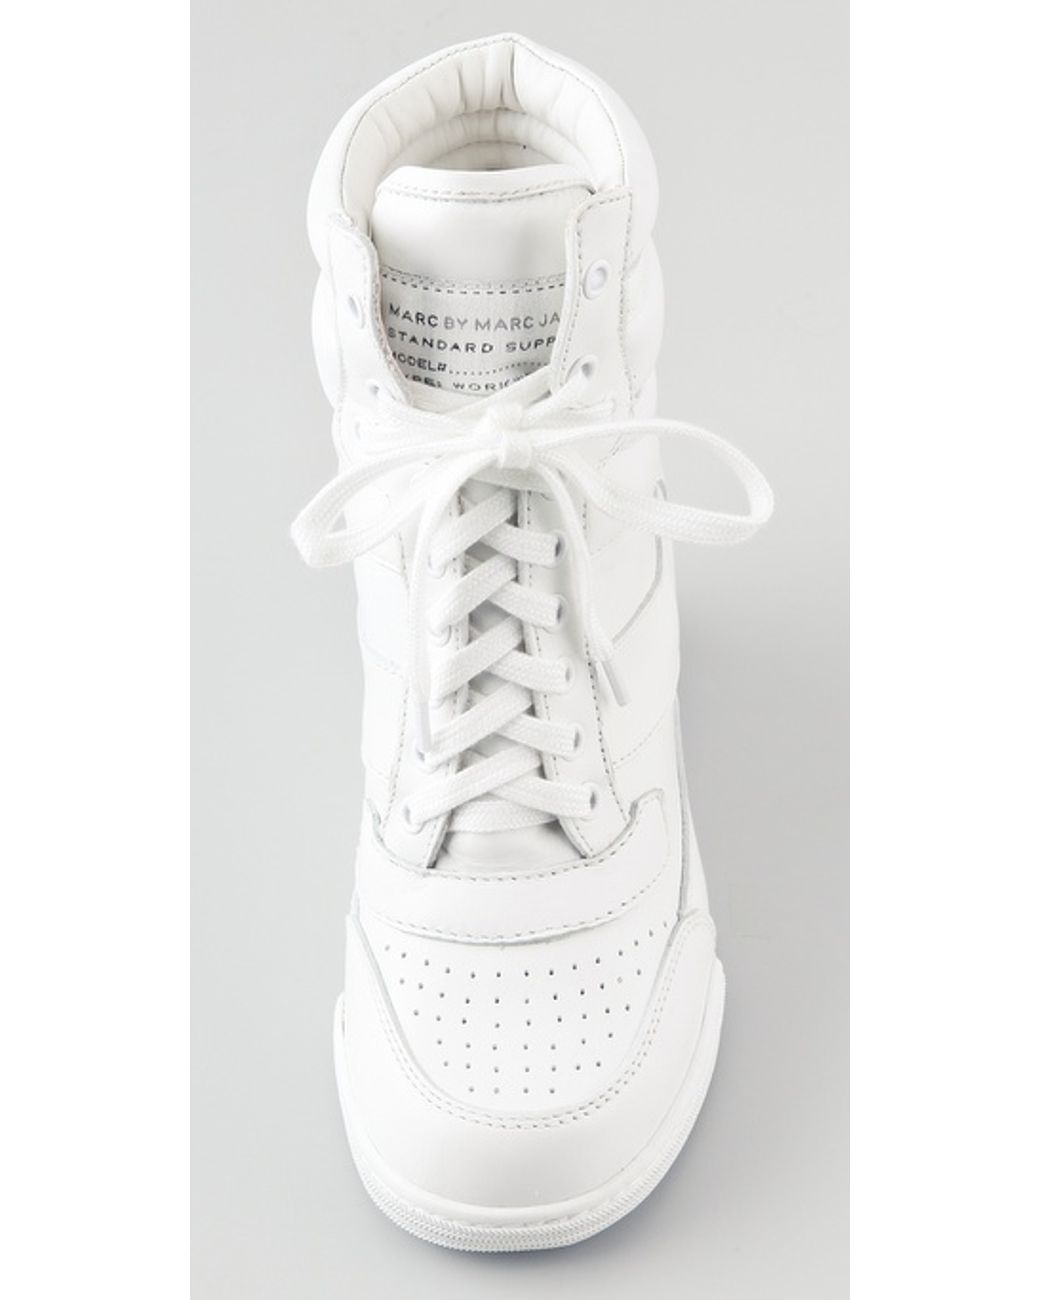 Marc By Marc Jacobs Hi Top Wedge Sneakers in White | Lyst